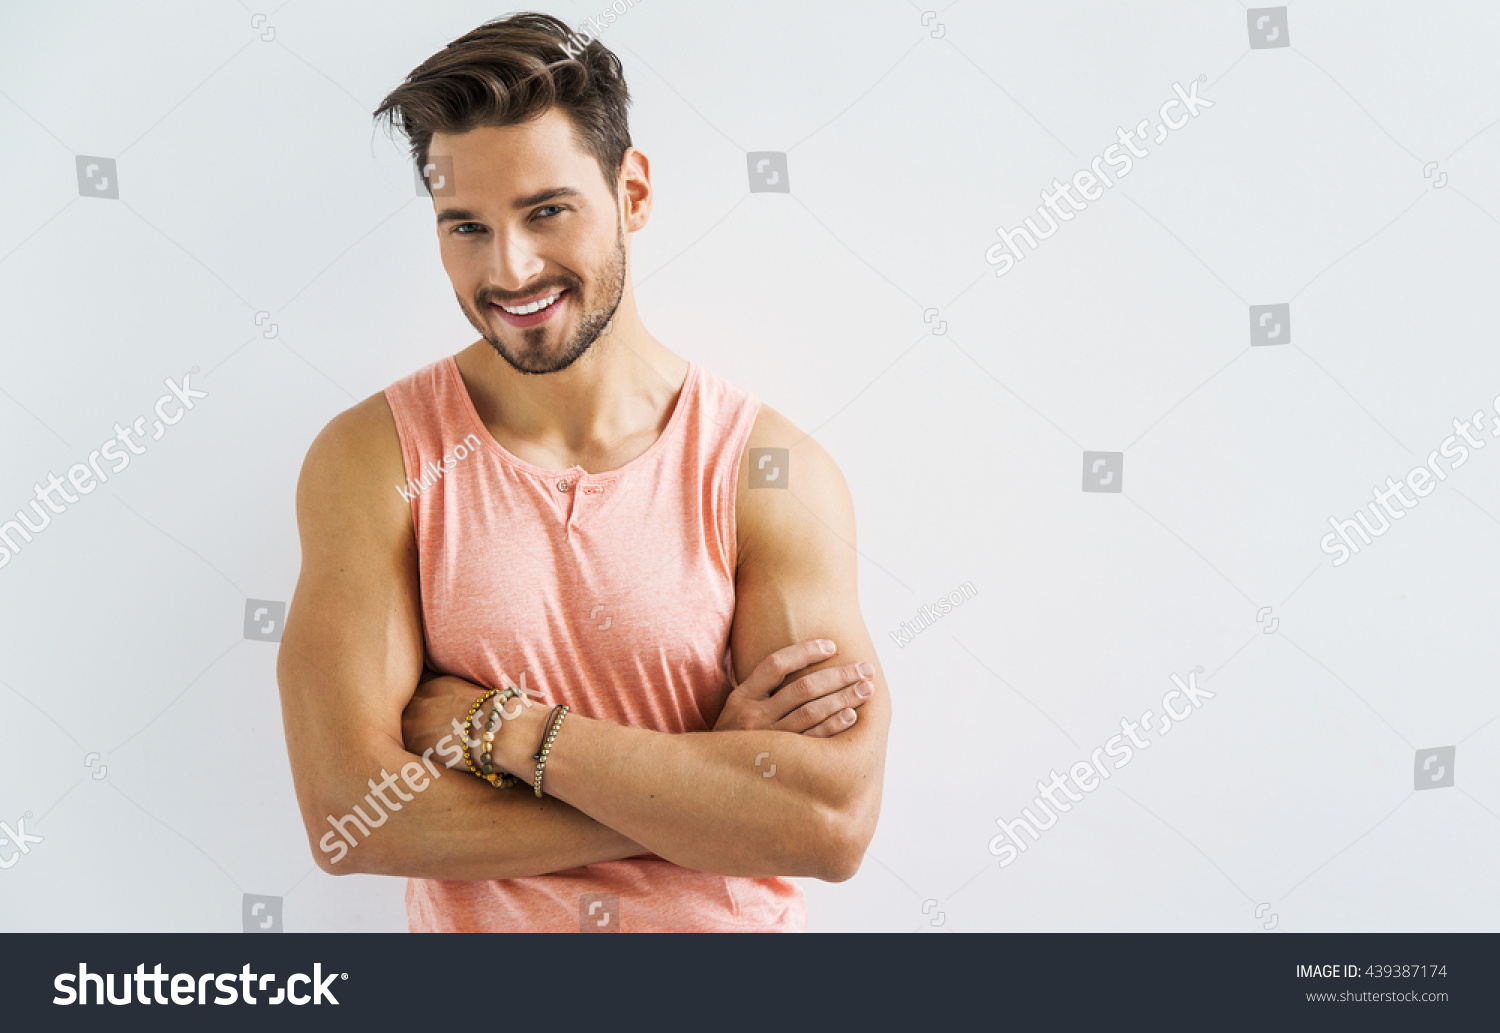 Sexy Smiling Male Model Crossed Arms Stock Photo (Edit Now) 439387174